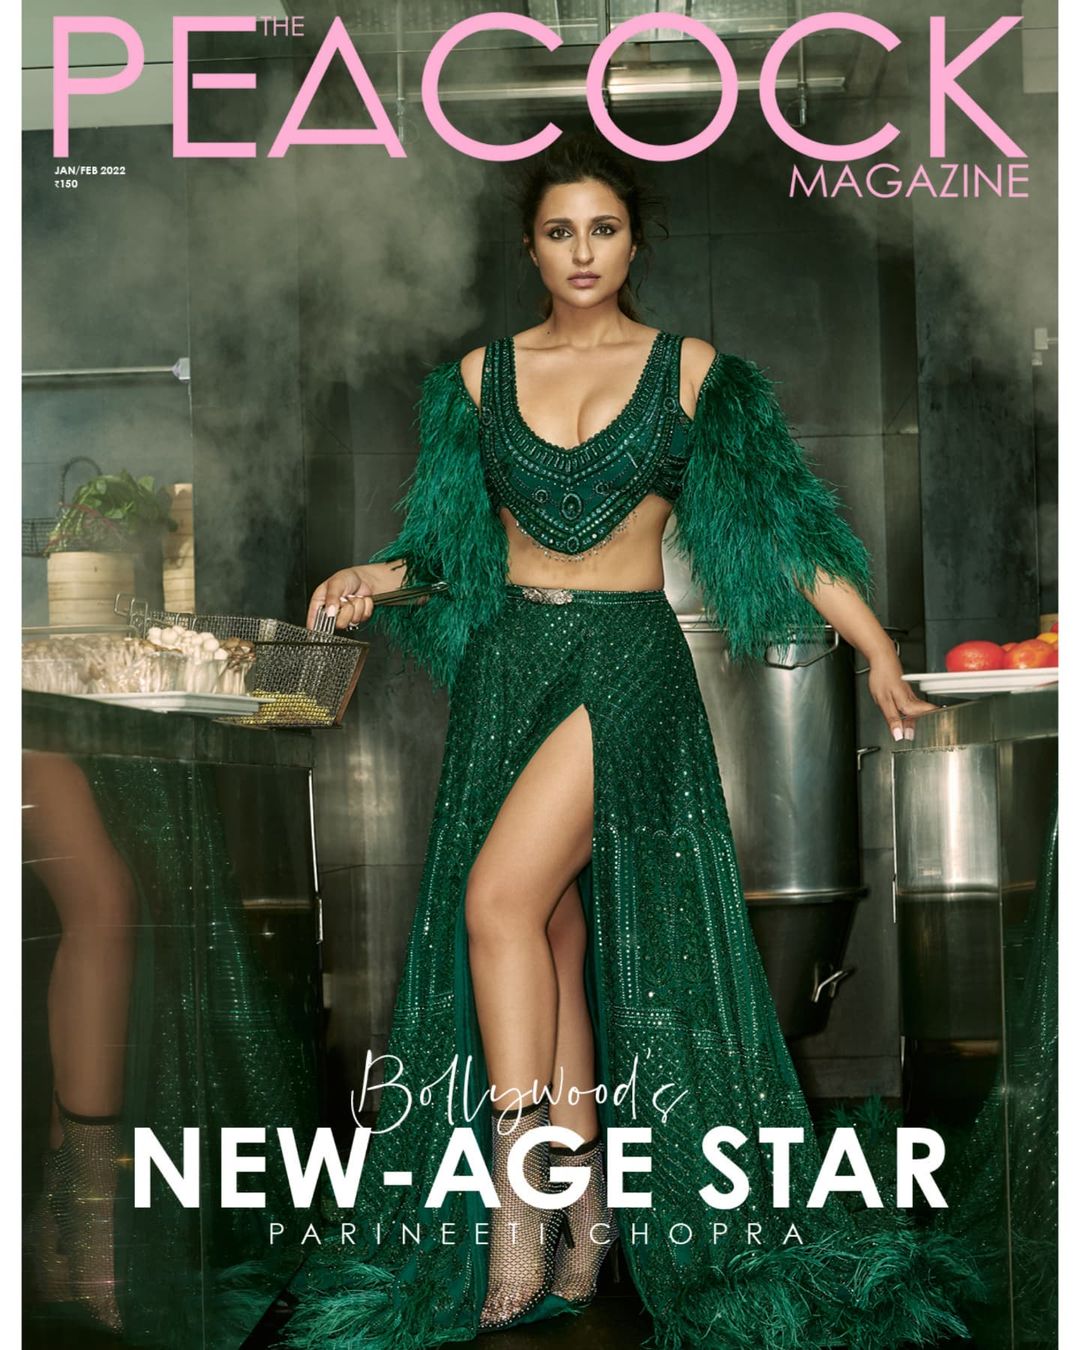 Parineeti Chopra looks absolutely smashing in a sexy green lehenga on the cover of a fashion magazine. Scroll ahead as we round up some of her best magazine covers over the years.